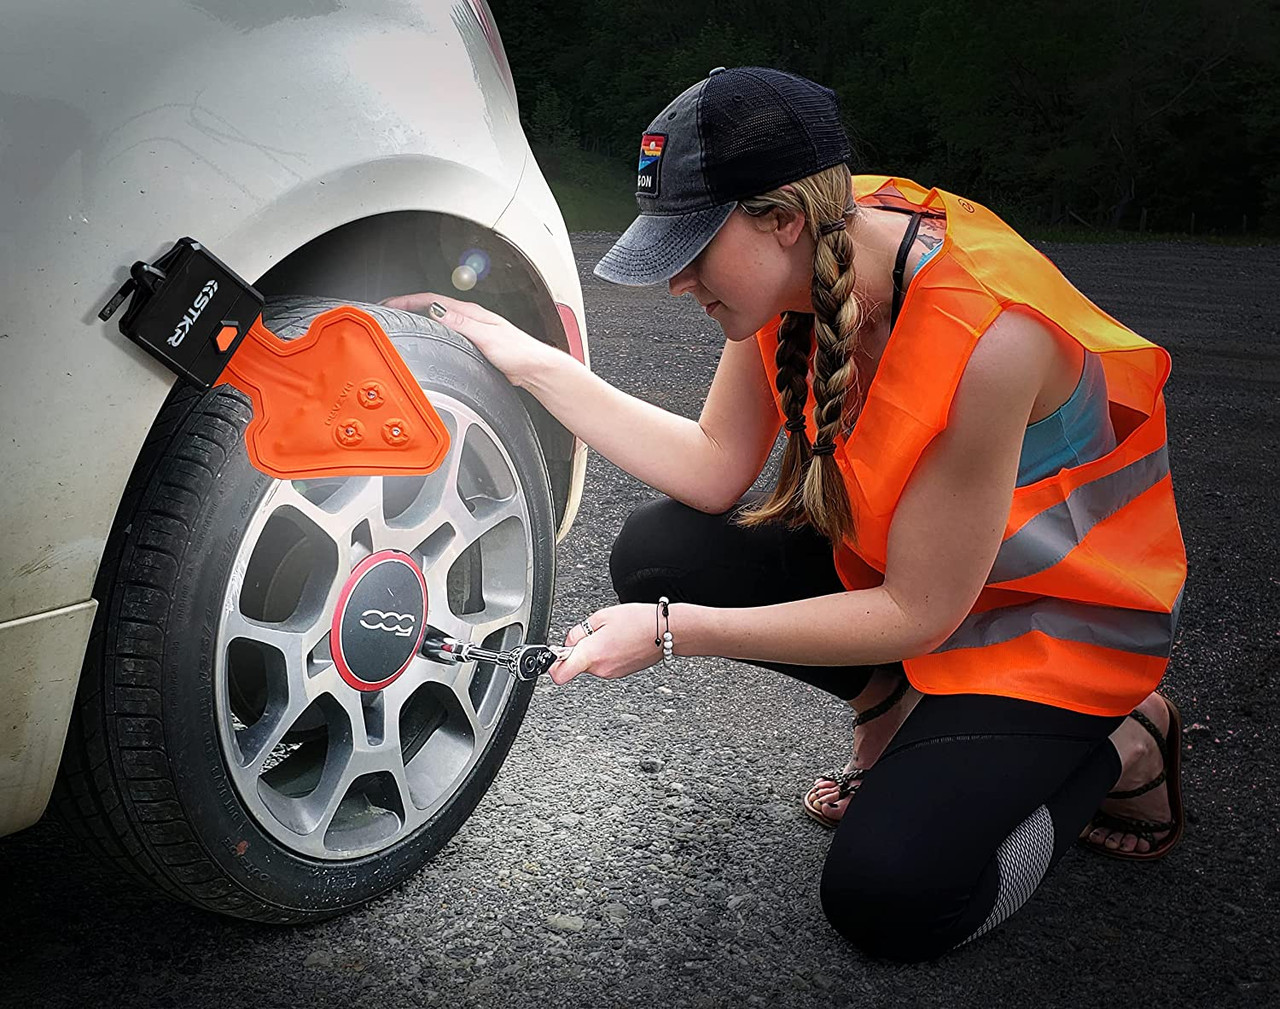  A woman in an orange safety vest uses a portable tool to change a car tire on the roadside.